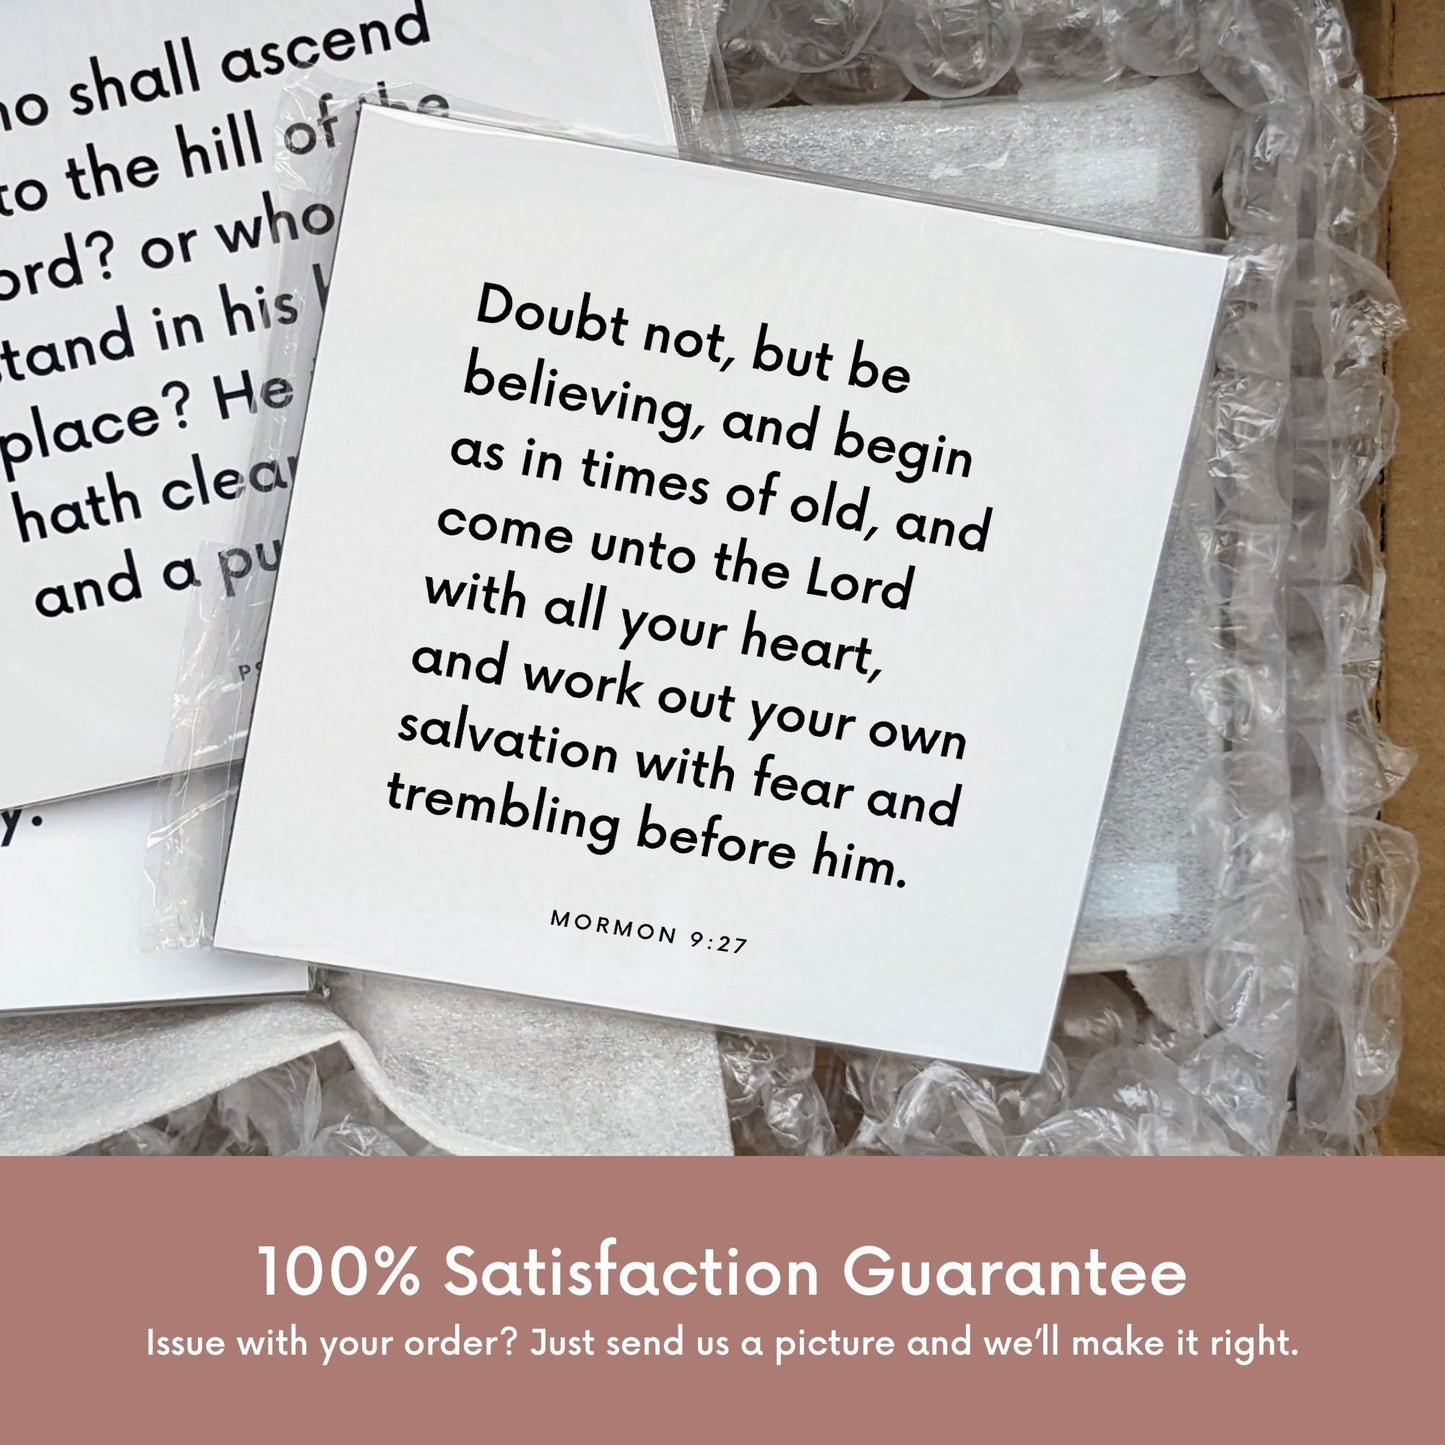 Shipping materials for scripture tile of Mormon 9:27 - "Doubt not, but be believing"